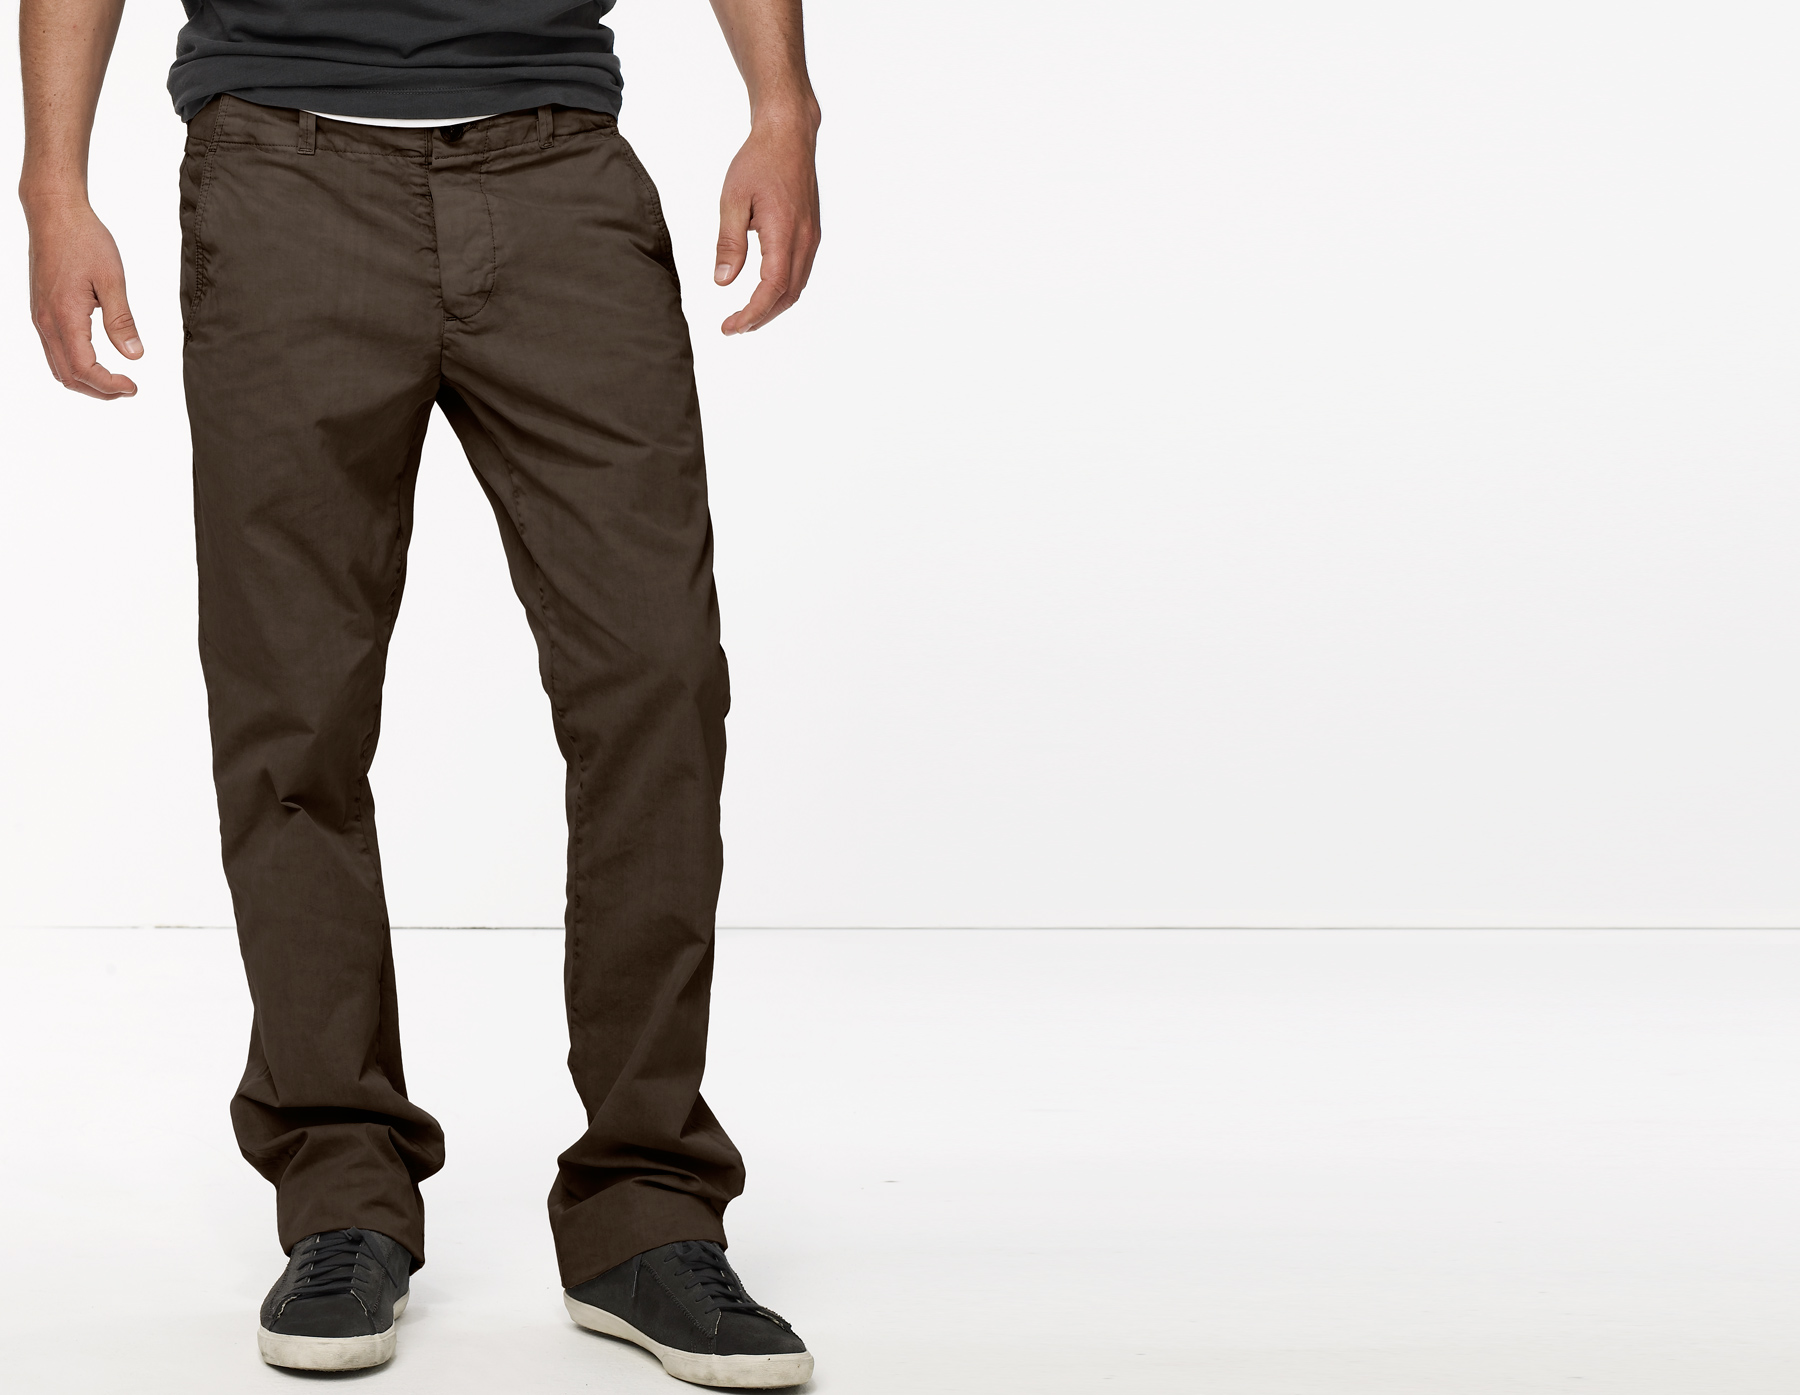 James Perse Clean Chino in Brown for Men - Lyst